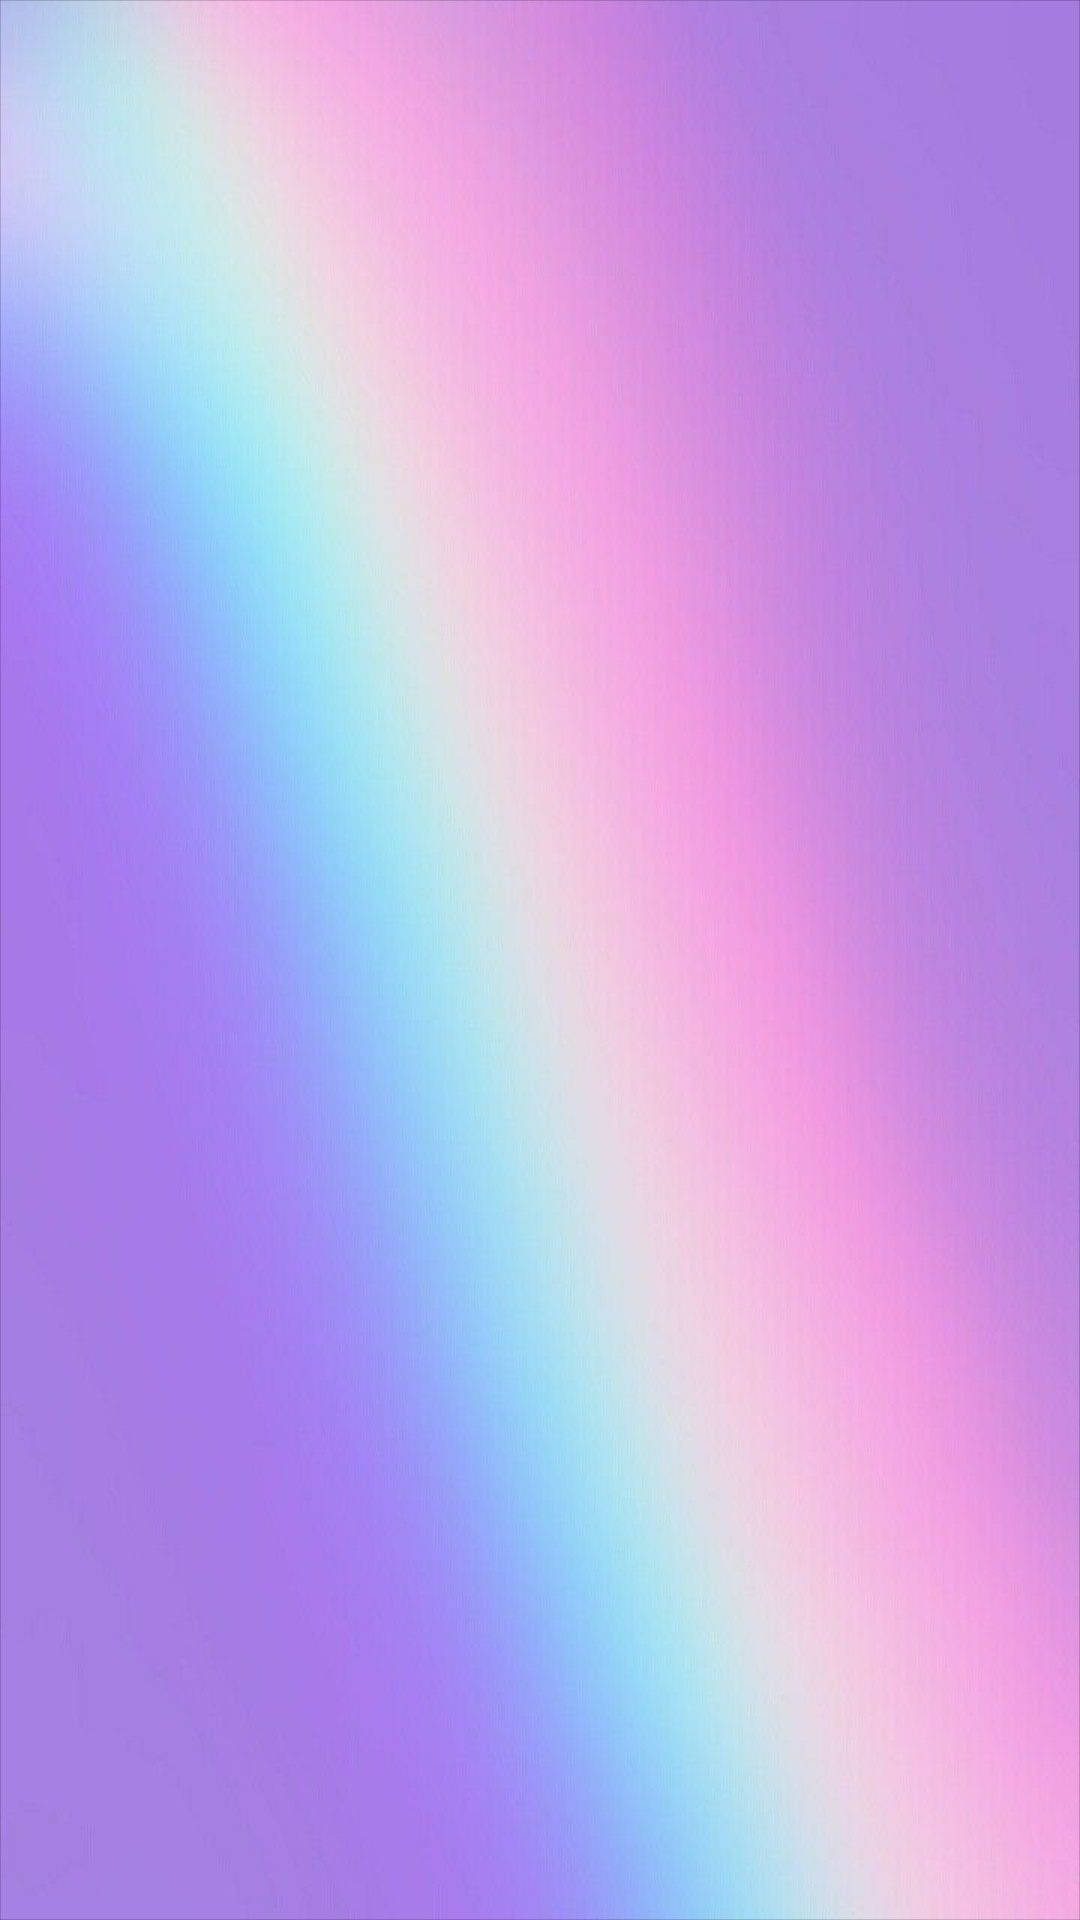 Vibrant Holographic Foil Rainbow-Colored iPhone Wallpaper